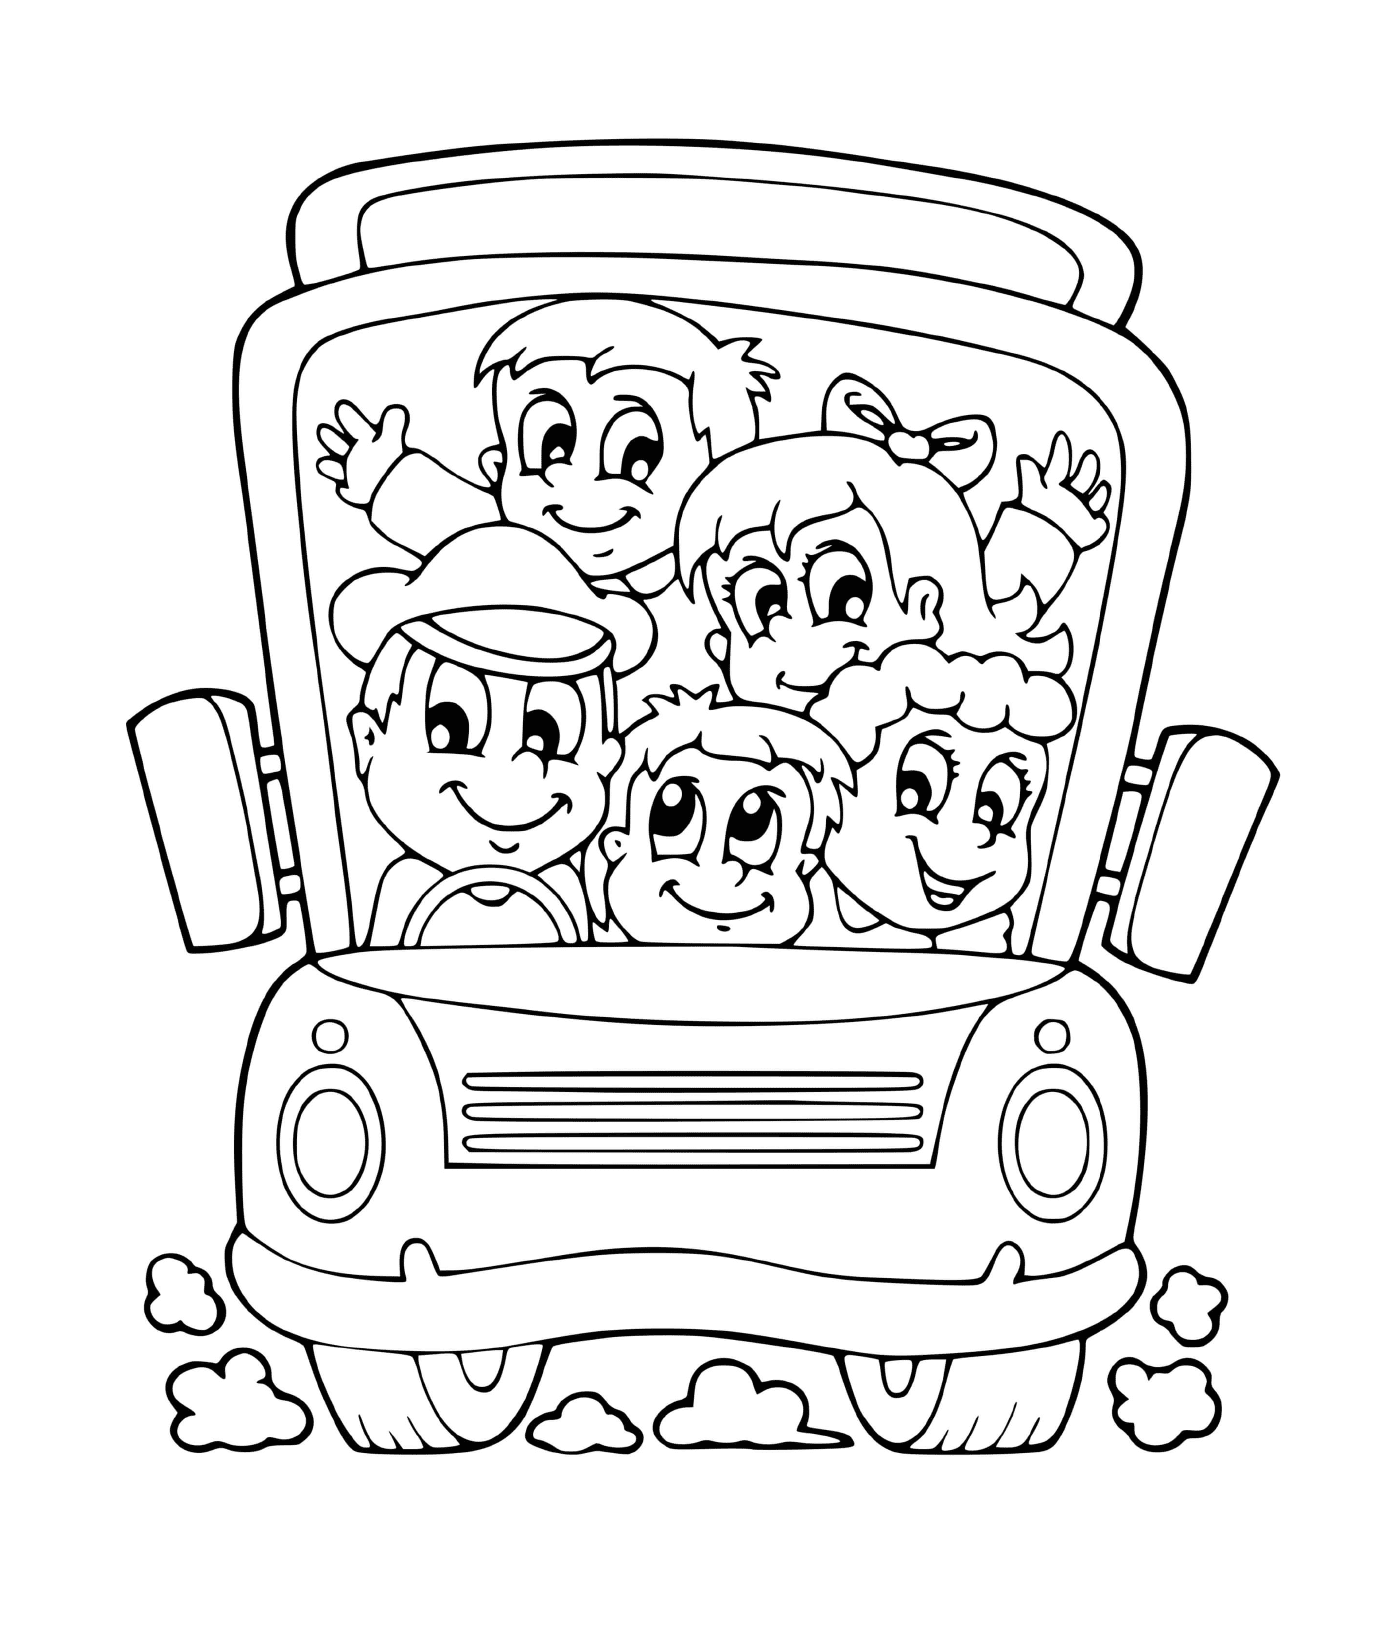  A school bus with students on board 